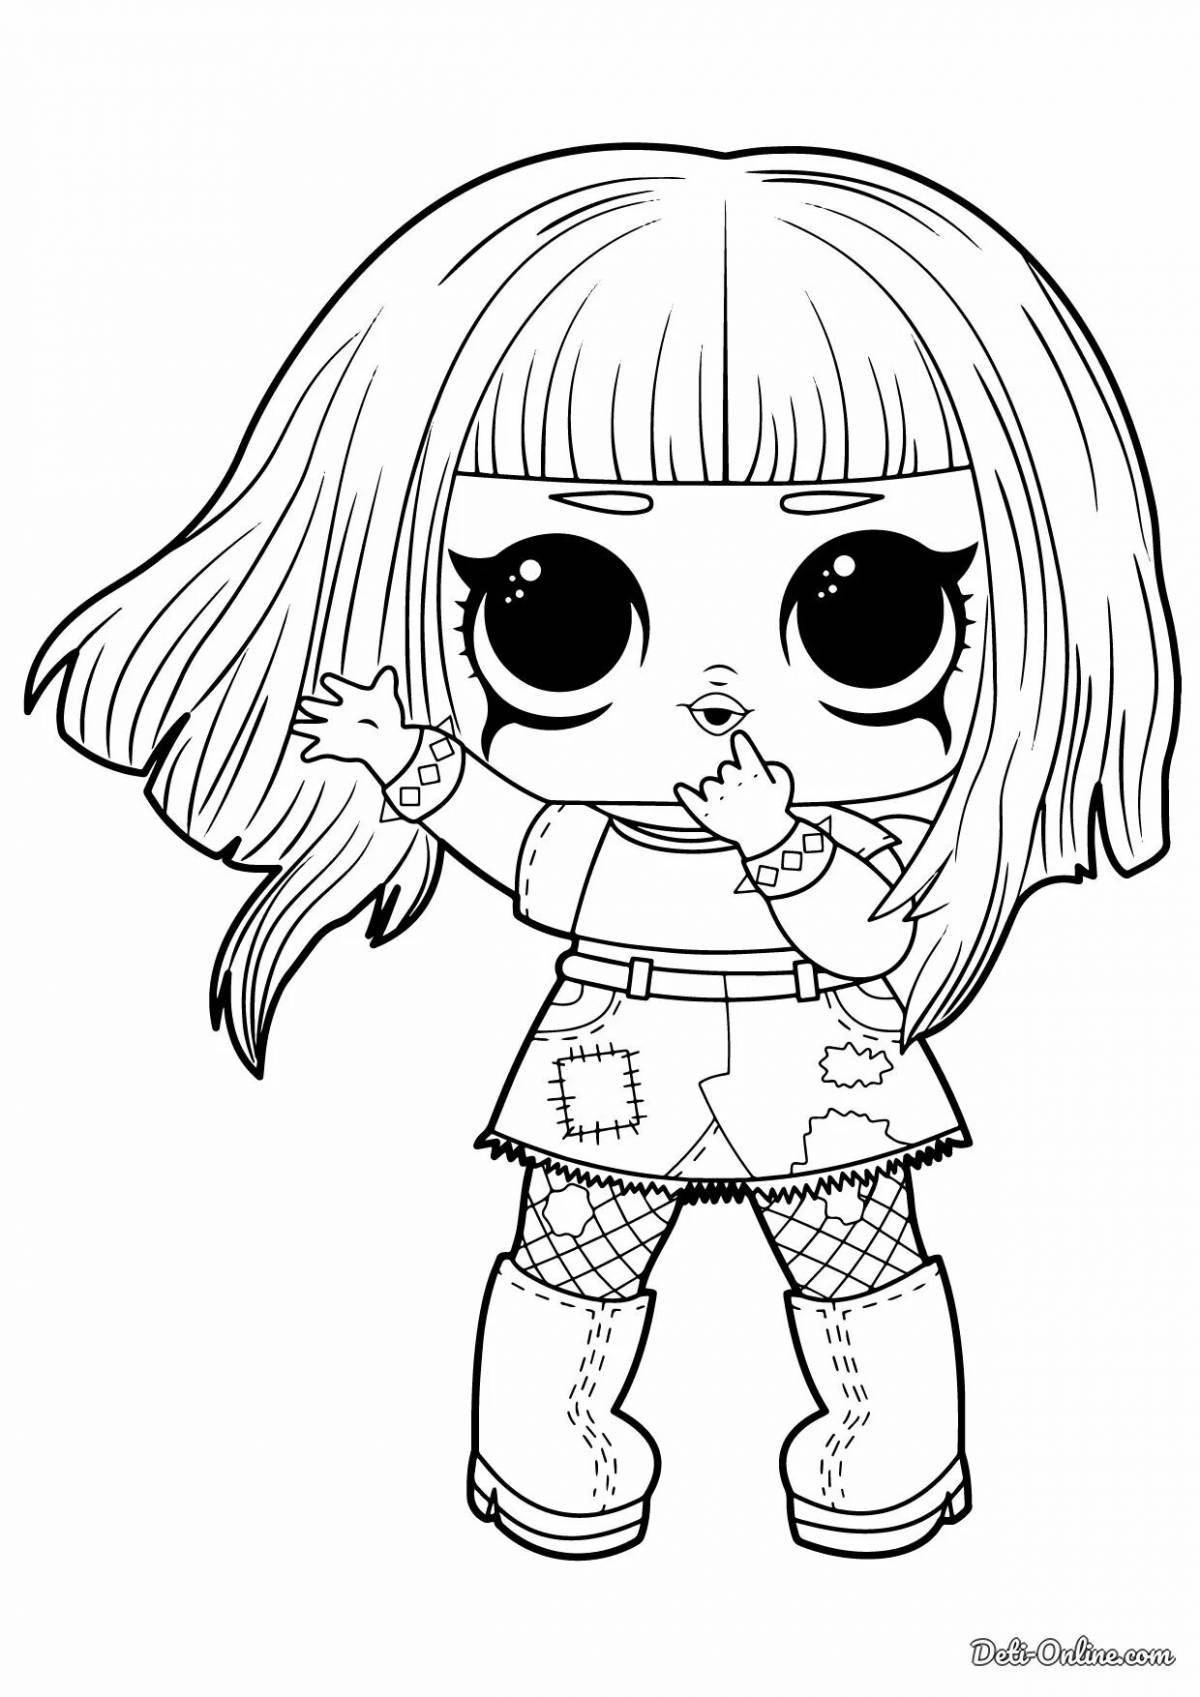 Splendid coloring page lol doll coloring book